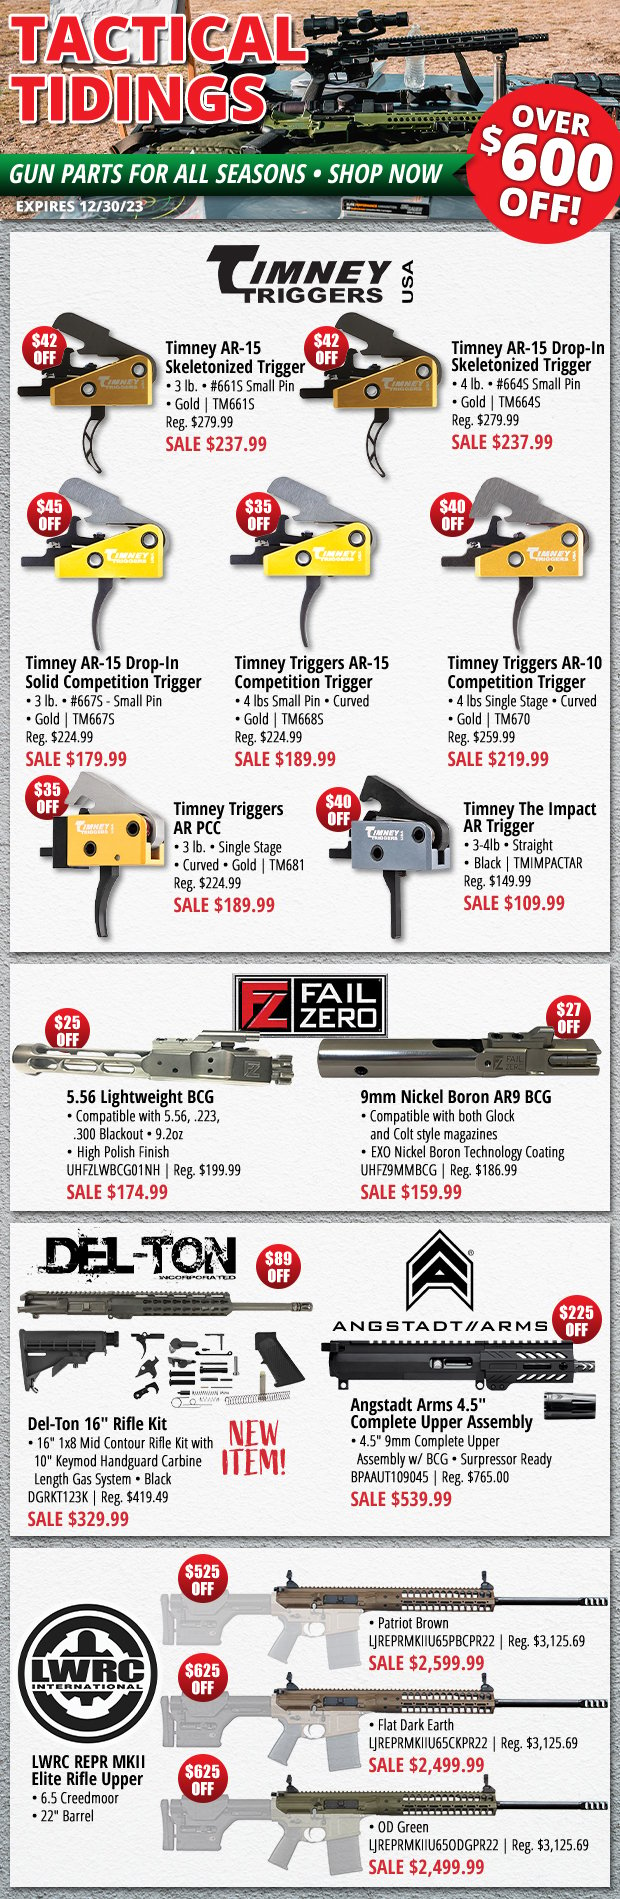 Tactical Tiding with Gun Parts Over $600 Off!